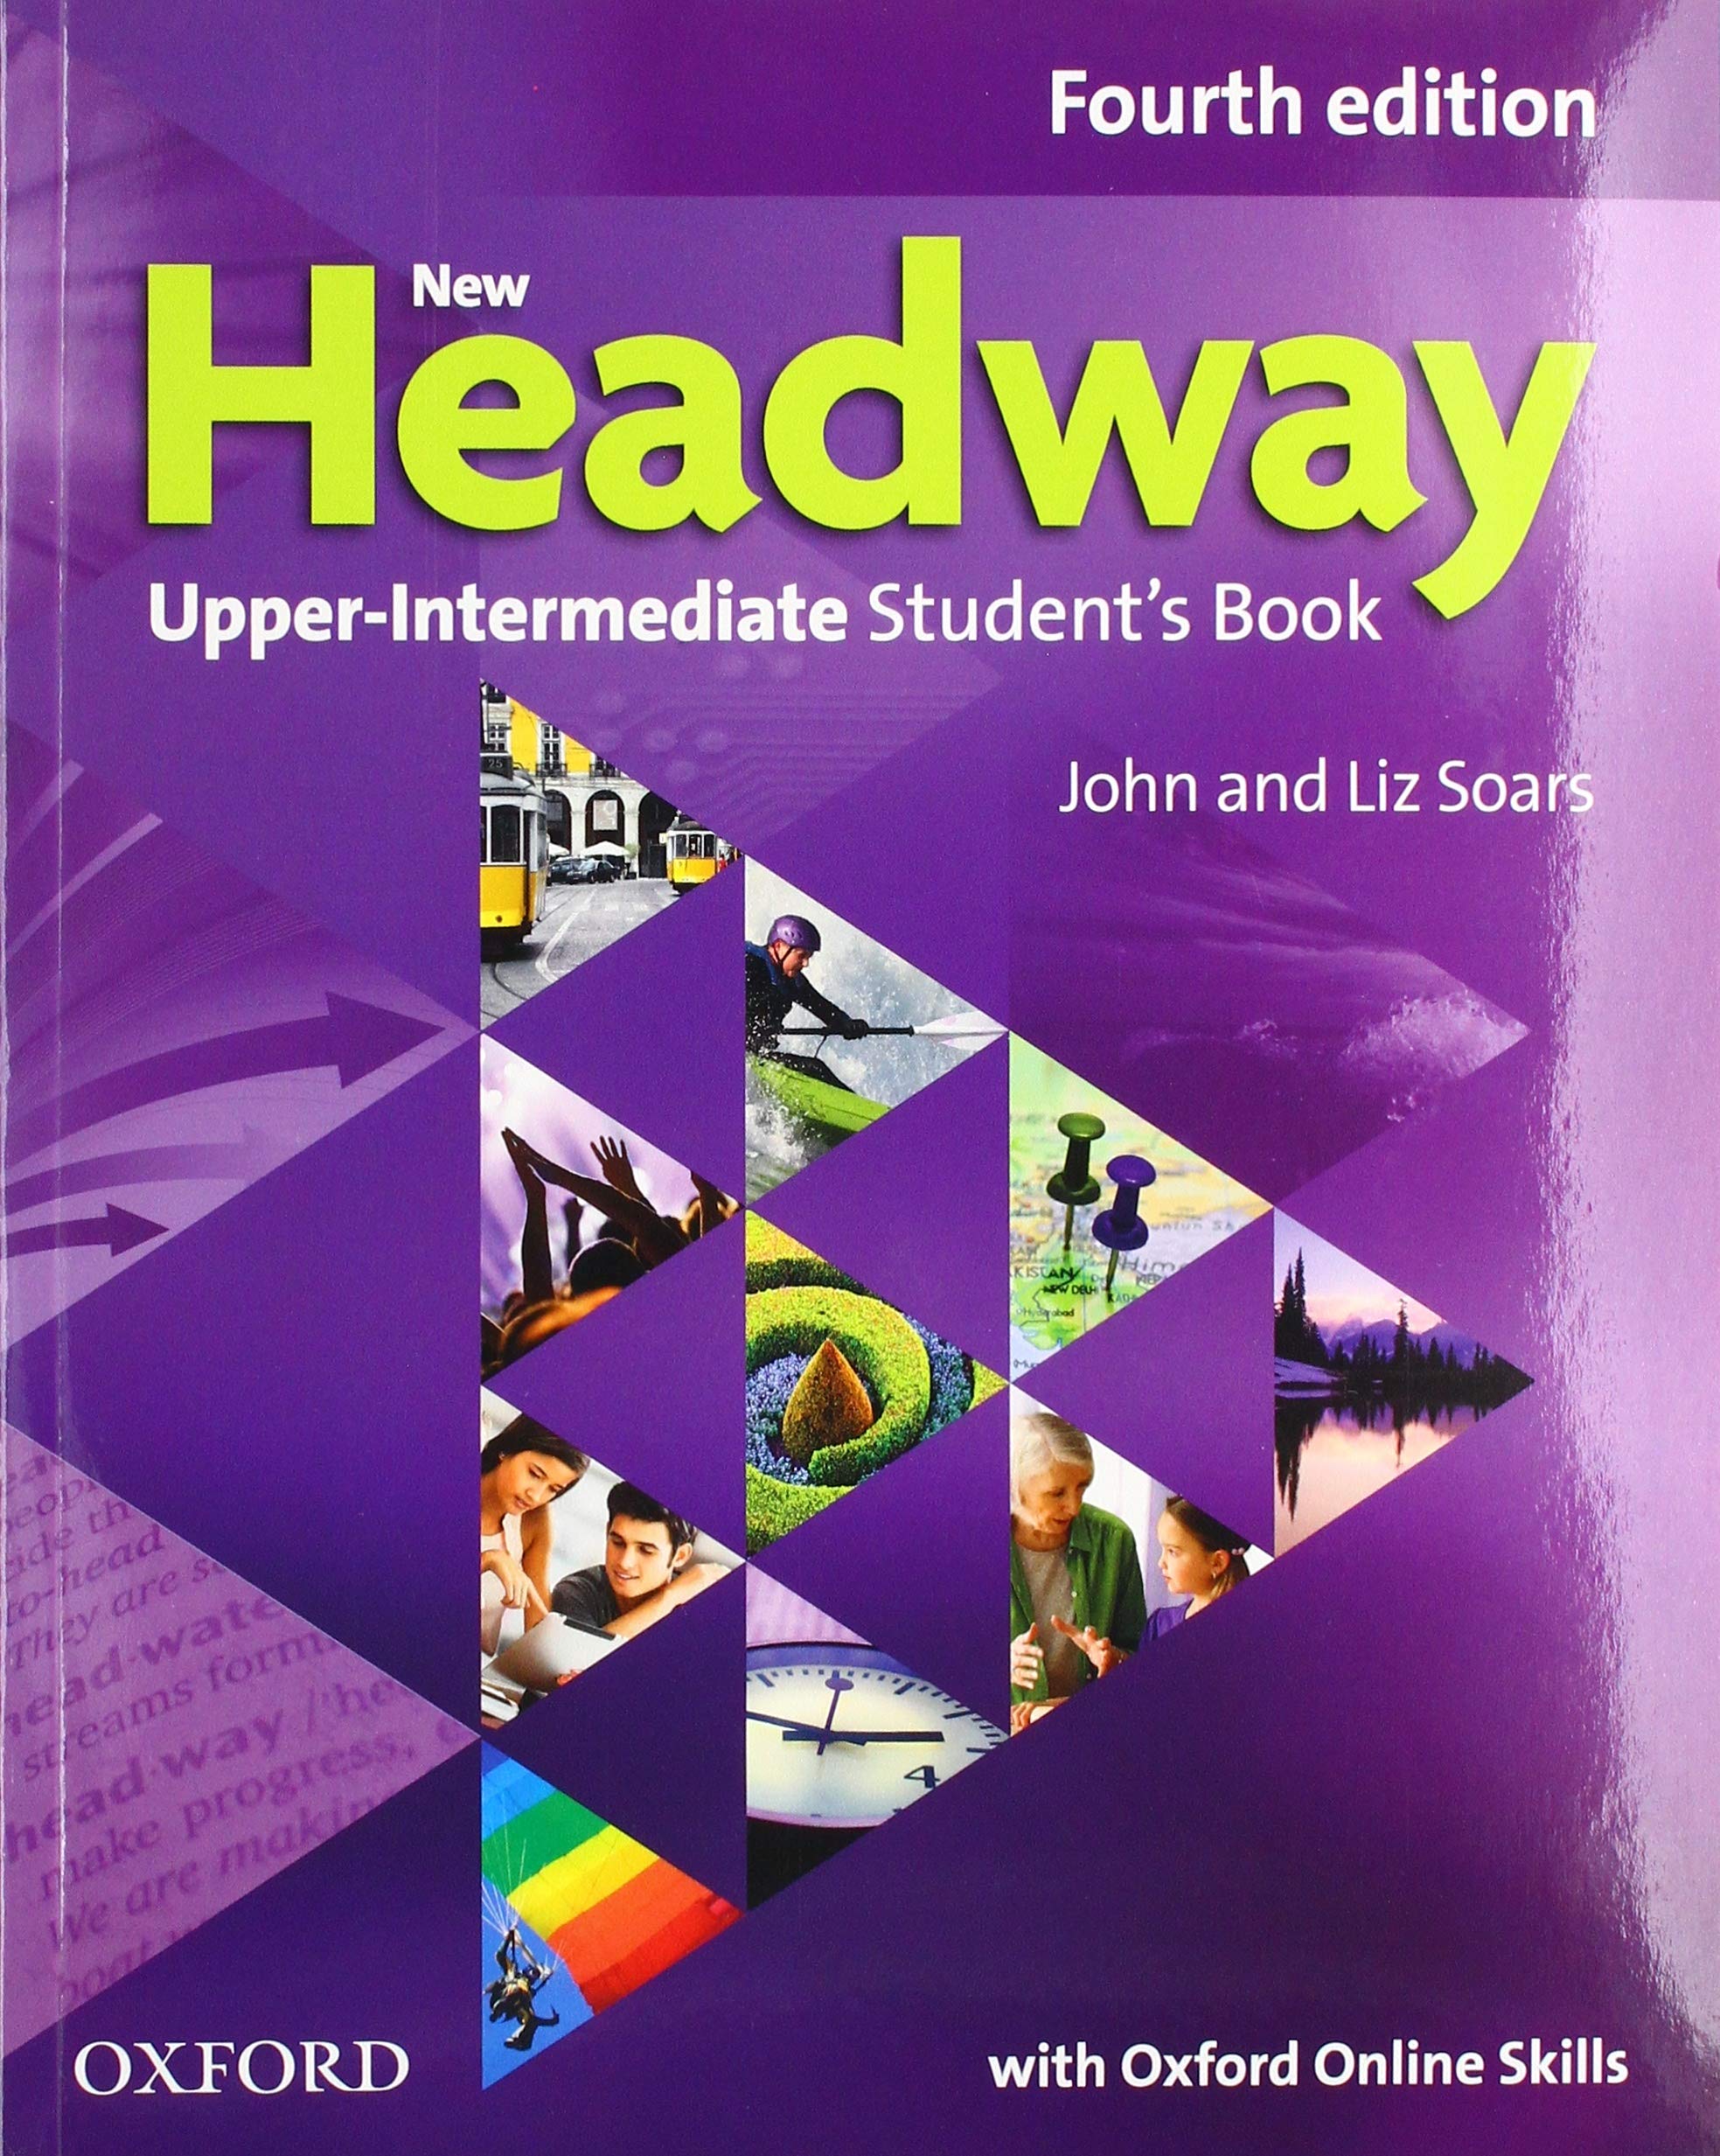 New headway upper. Headway Intermediate student's book New Edition Liz and John. New Headway Elementary teacher's book 4th Edition programme. New Headway Upper Intermediate 1rd Edition. New Headway 4th Edition.